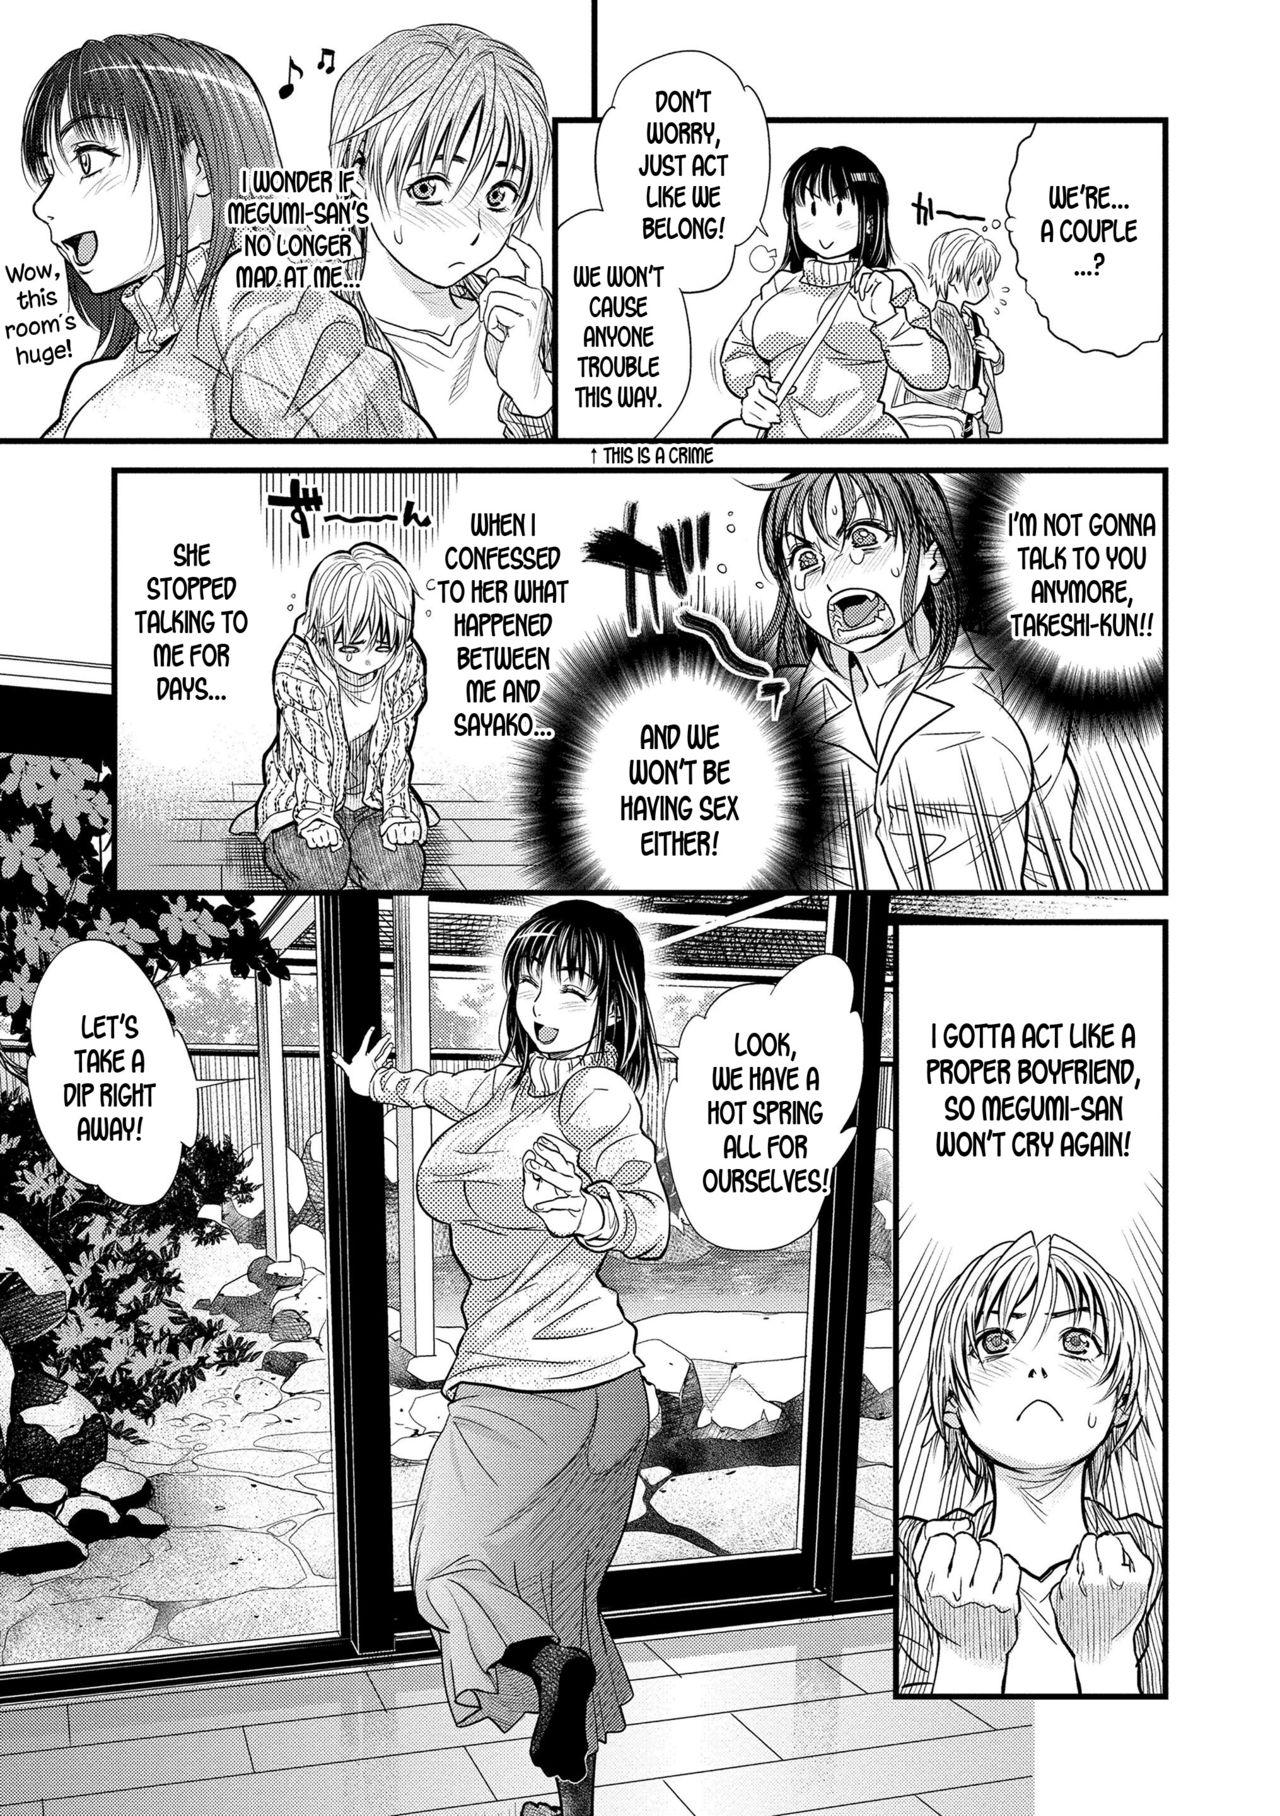 Boku to Itoko no Onee-san to | Together With My Older Cousin Ch. 3 2